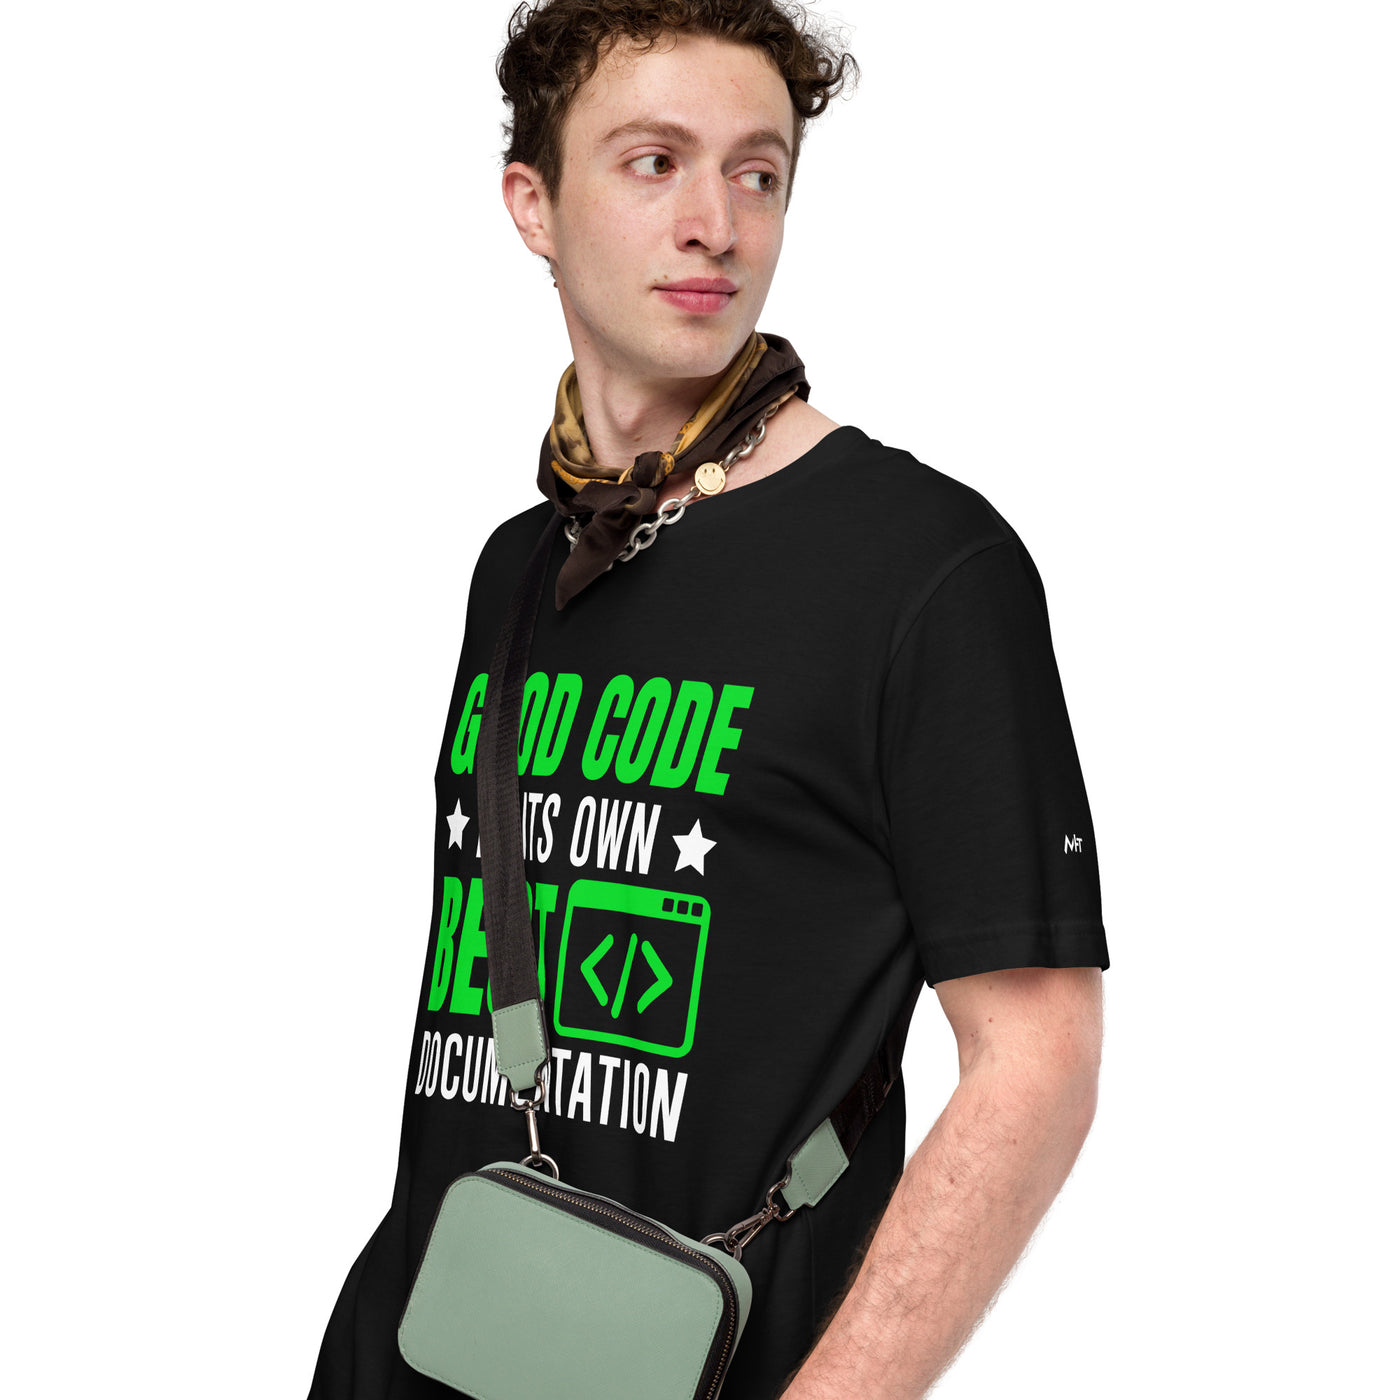 Good Code is in its own best documentation Unisex t-shirt